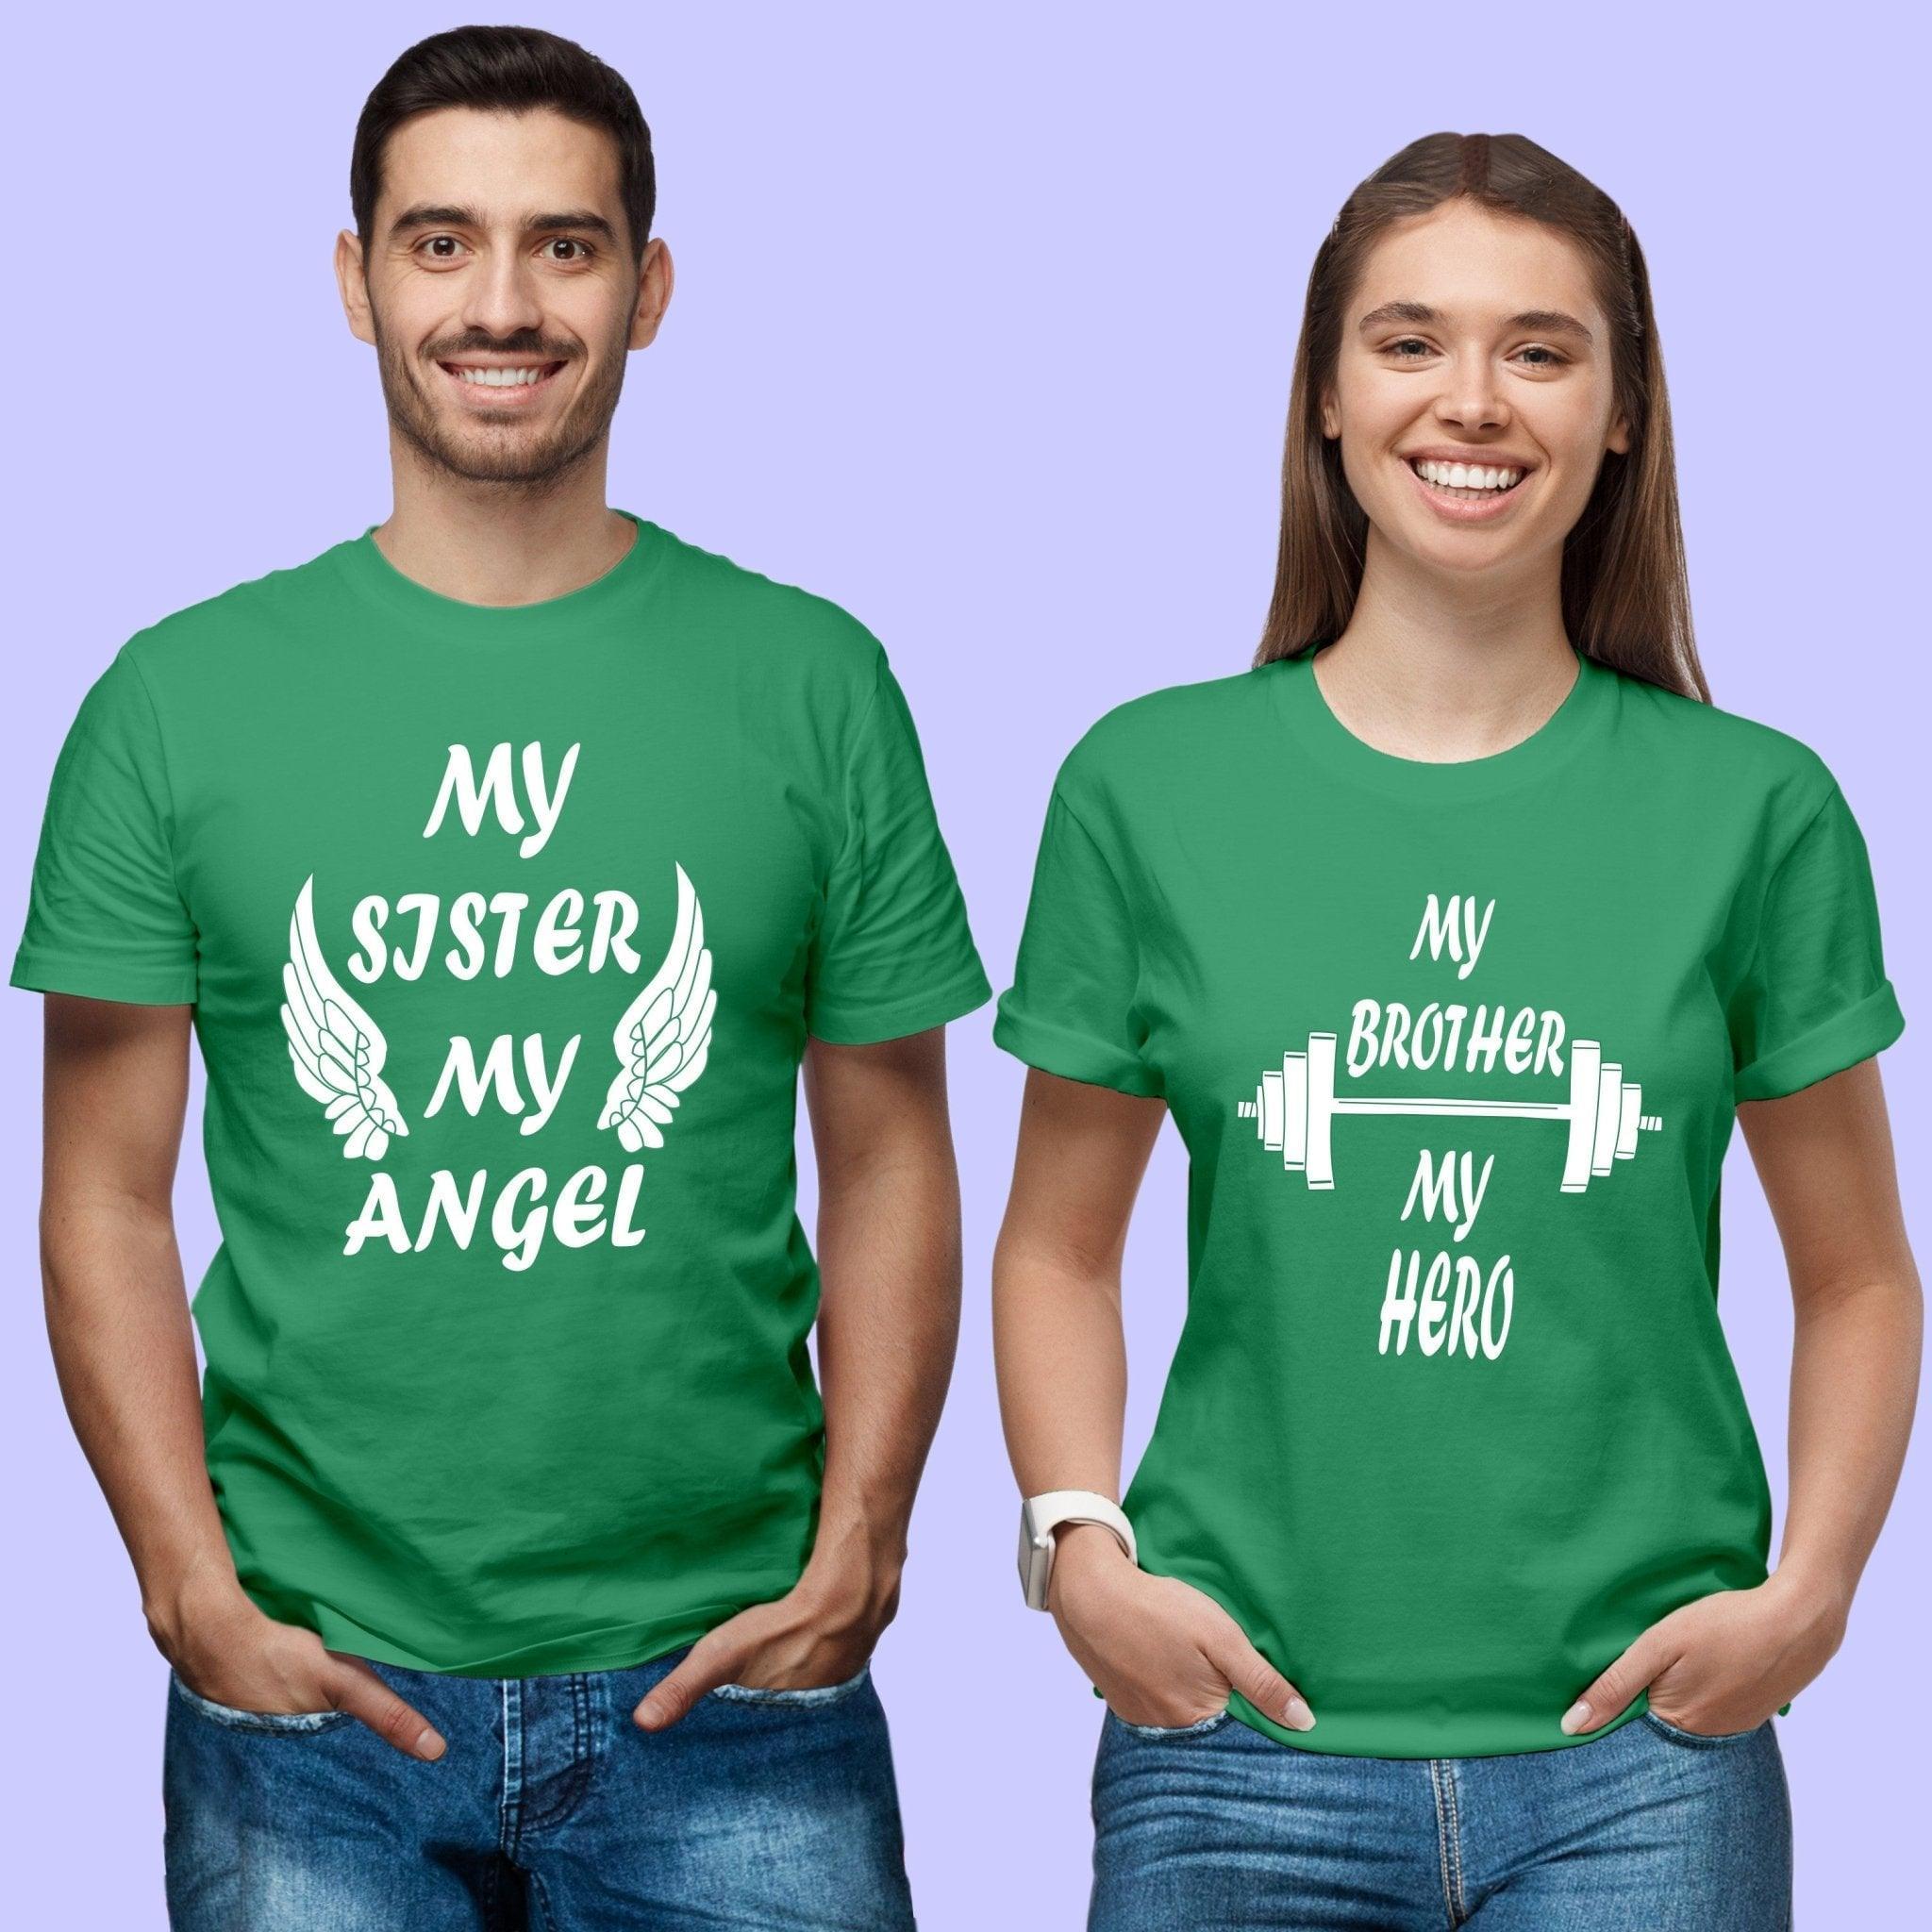 Sibling T Shirt for Adult Brother and Sister in Green Colour - My Sister My Angel My Brother My Hero Variant